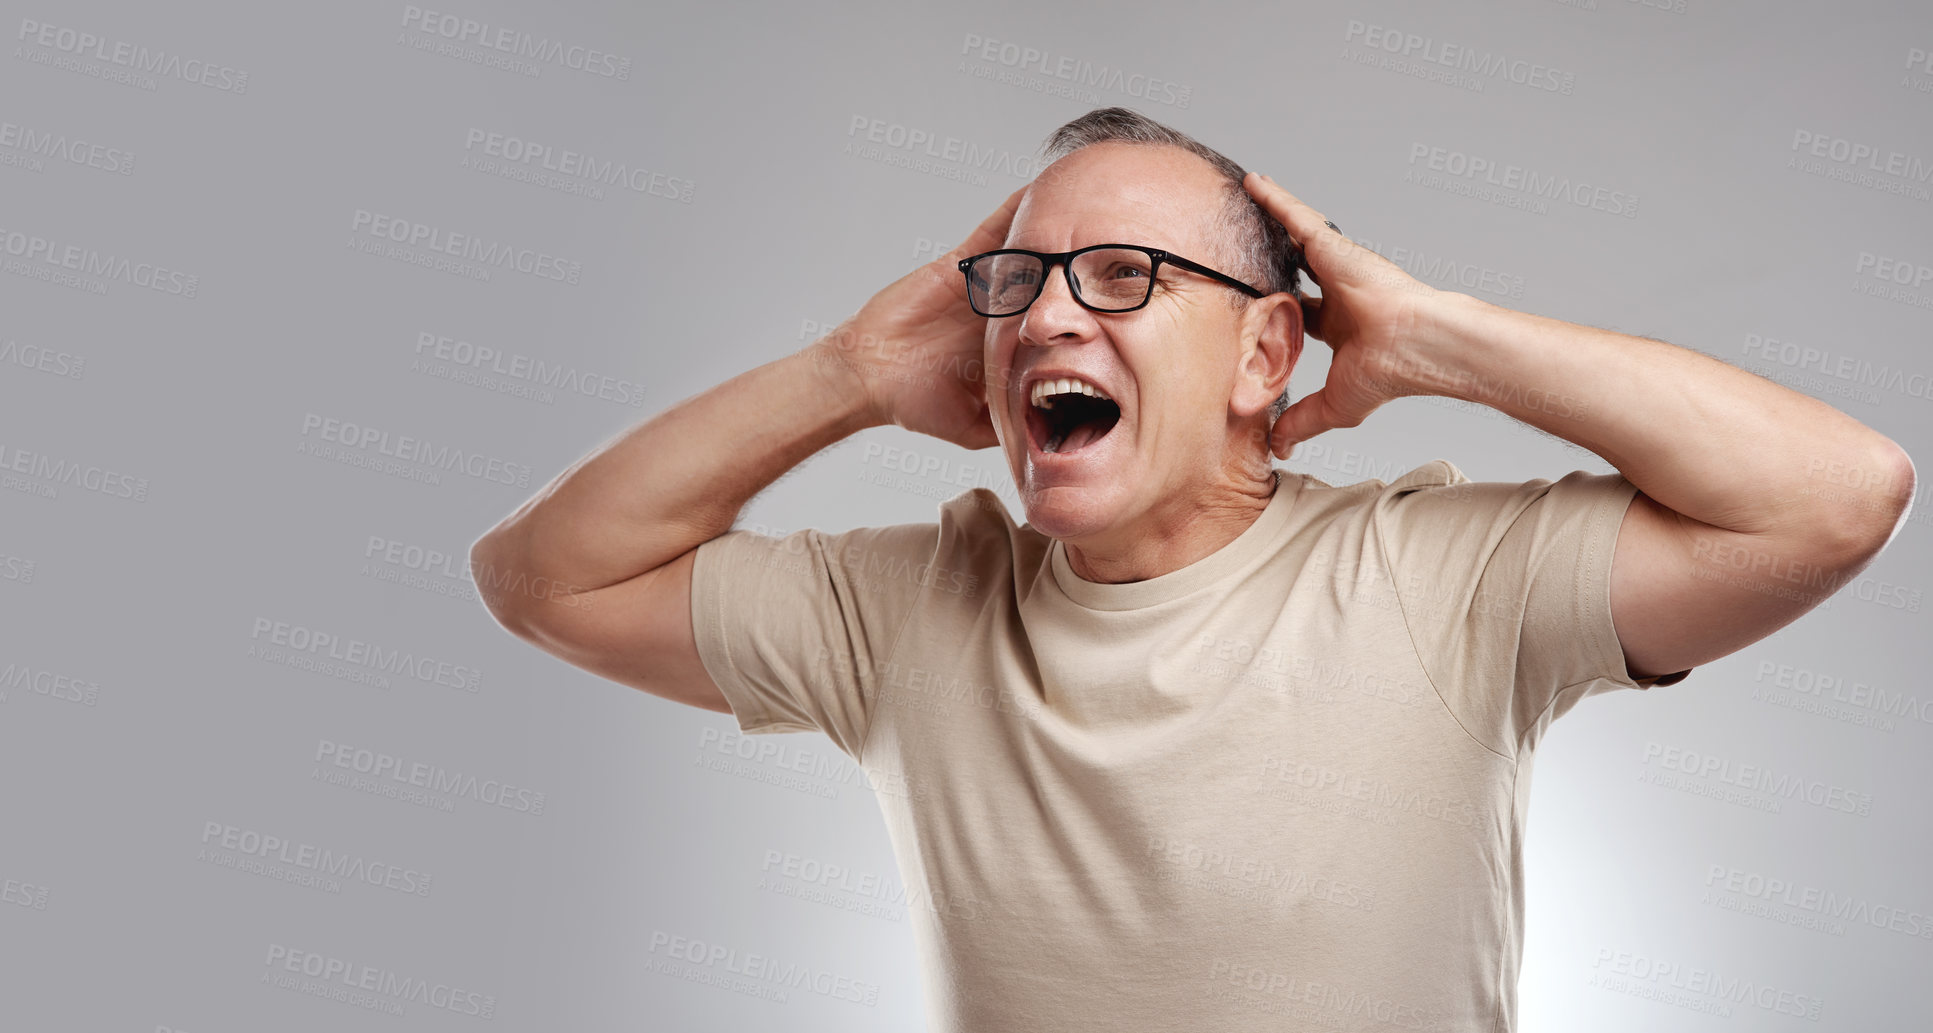 Buy stock photo Shot of a handsome mature man standing alone against a grey background with his hands behind his head